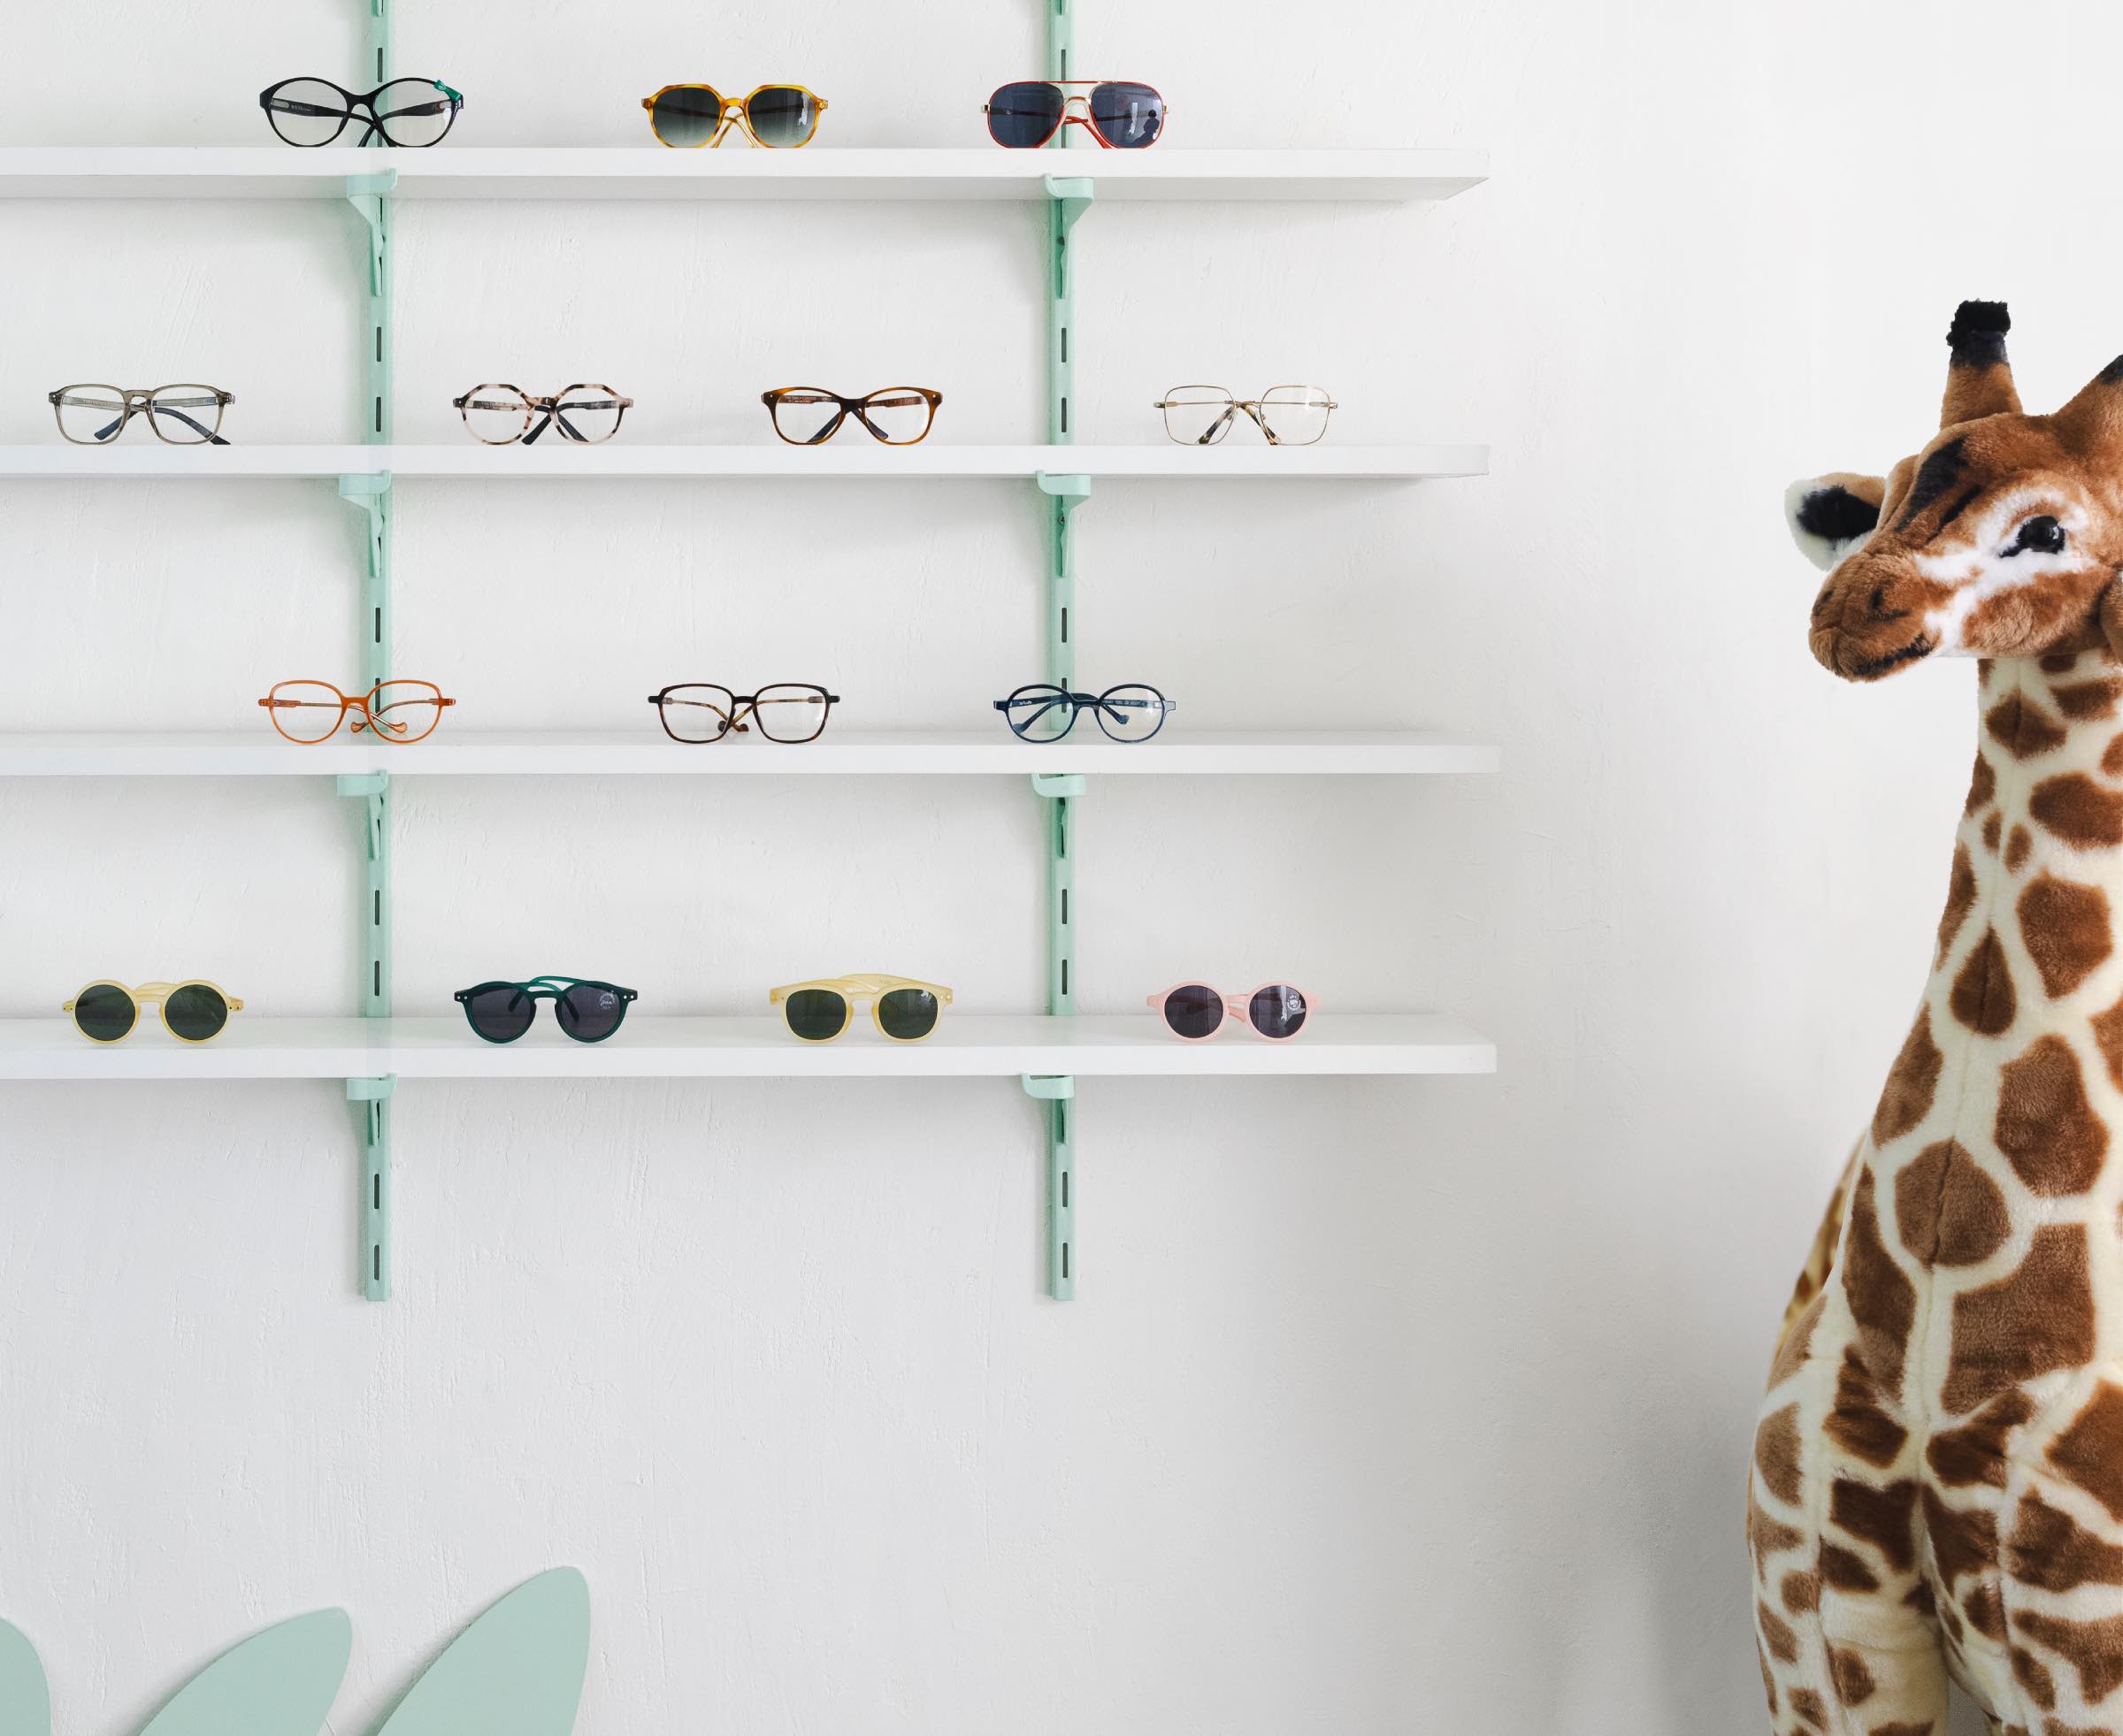 Petites Lunettes bei Lunettes Selection // HIMBEER